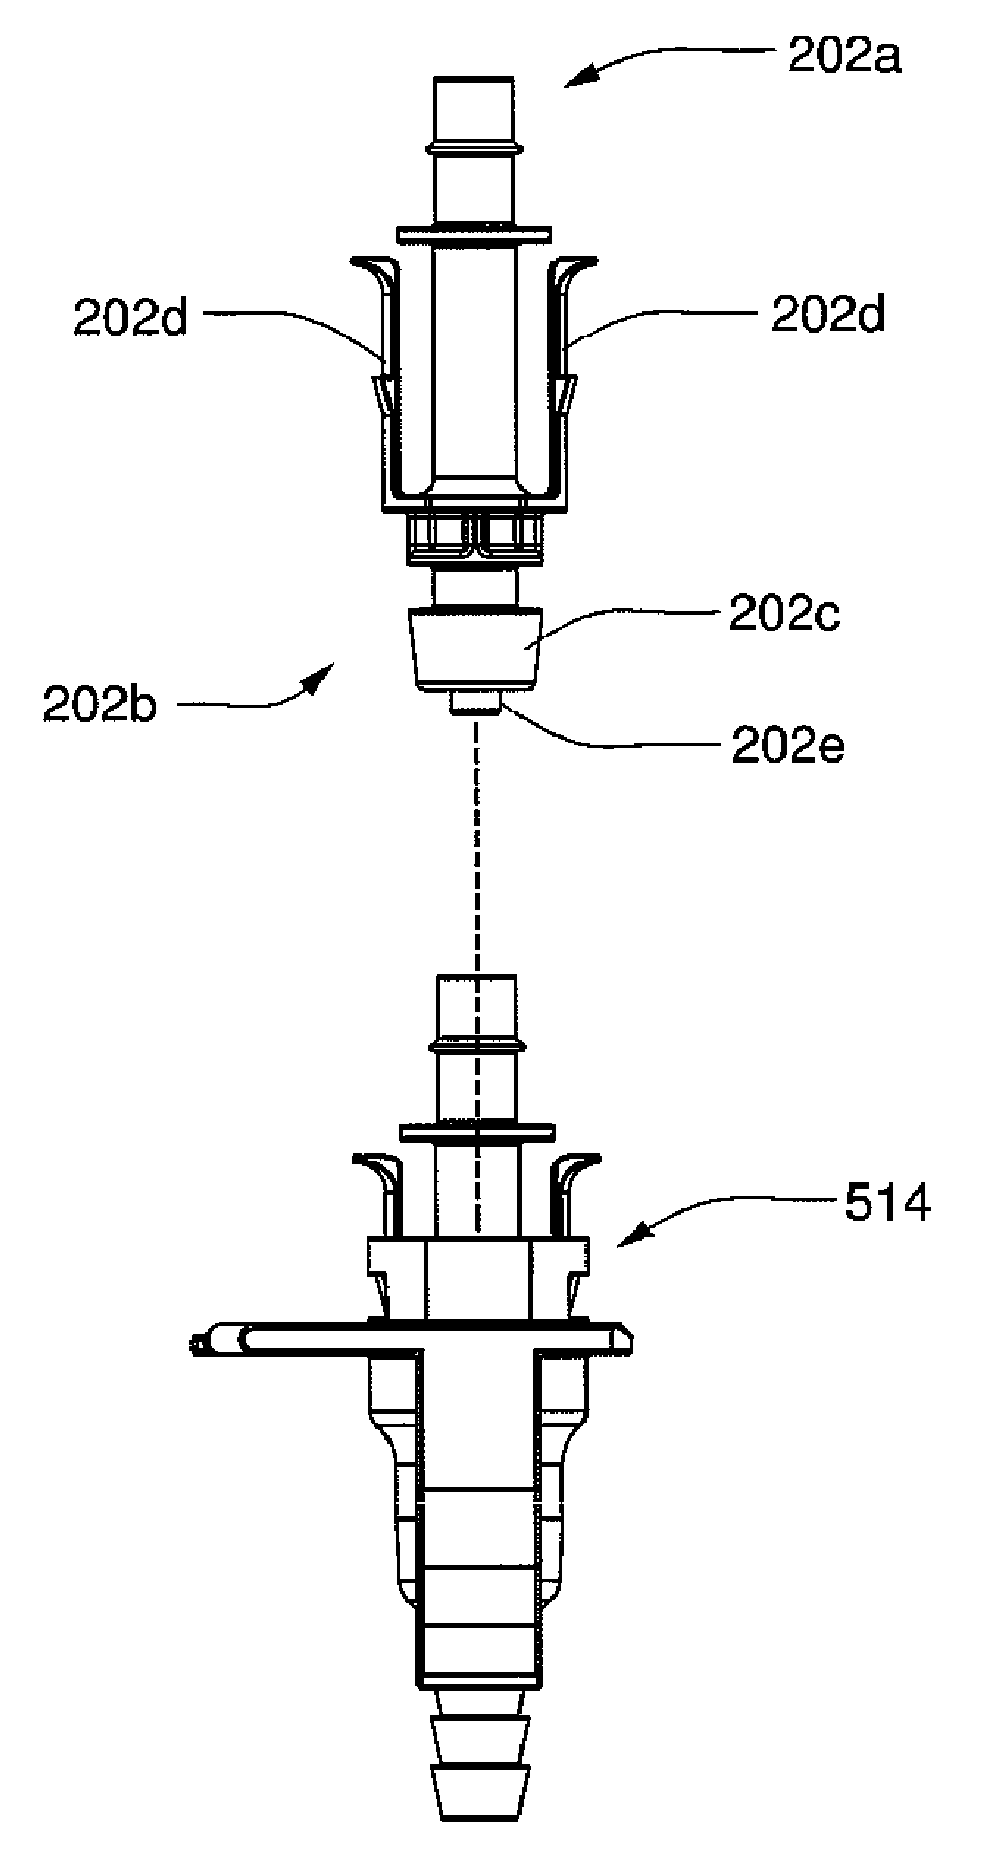 Blood line connector for a medical infusion device